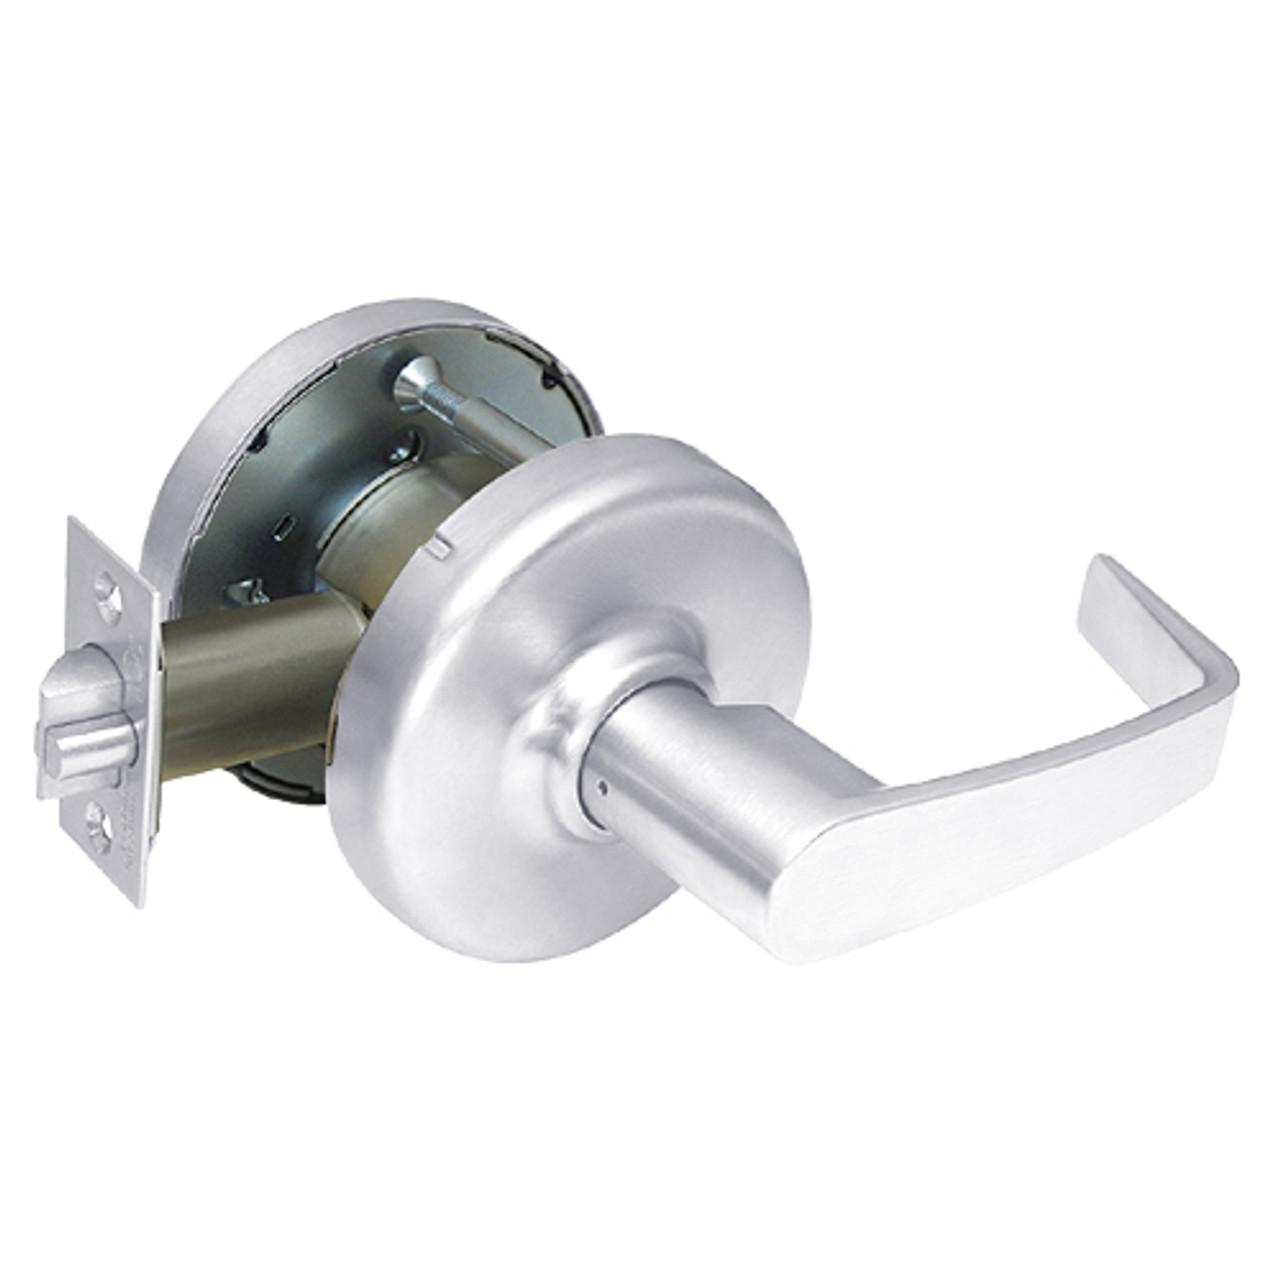 CL3390-NZD-625 Corbin CL3300 Series Extra Heavy Duty Passage with Turnpiece Cylindrical Locksets with Newport Lever in Bright Chrome Finish